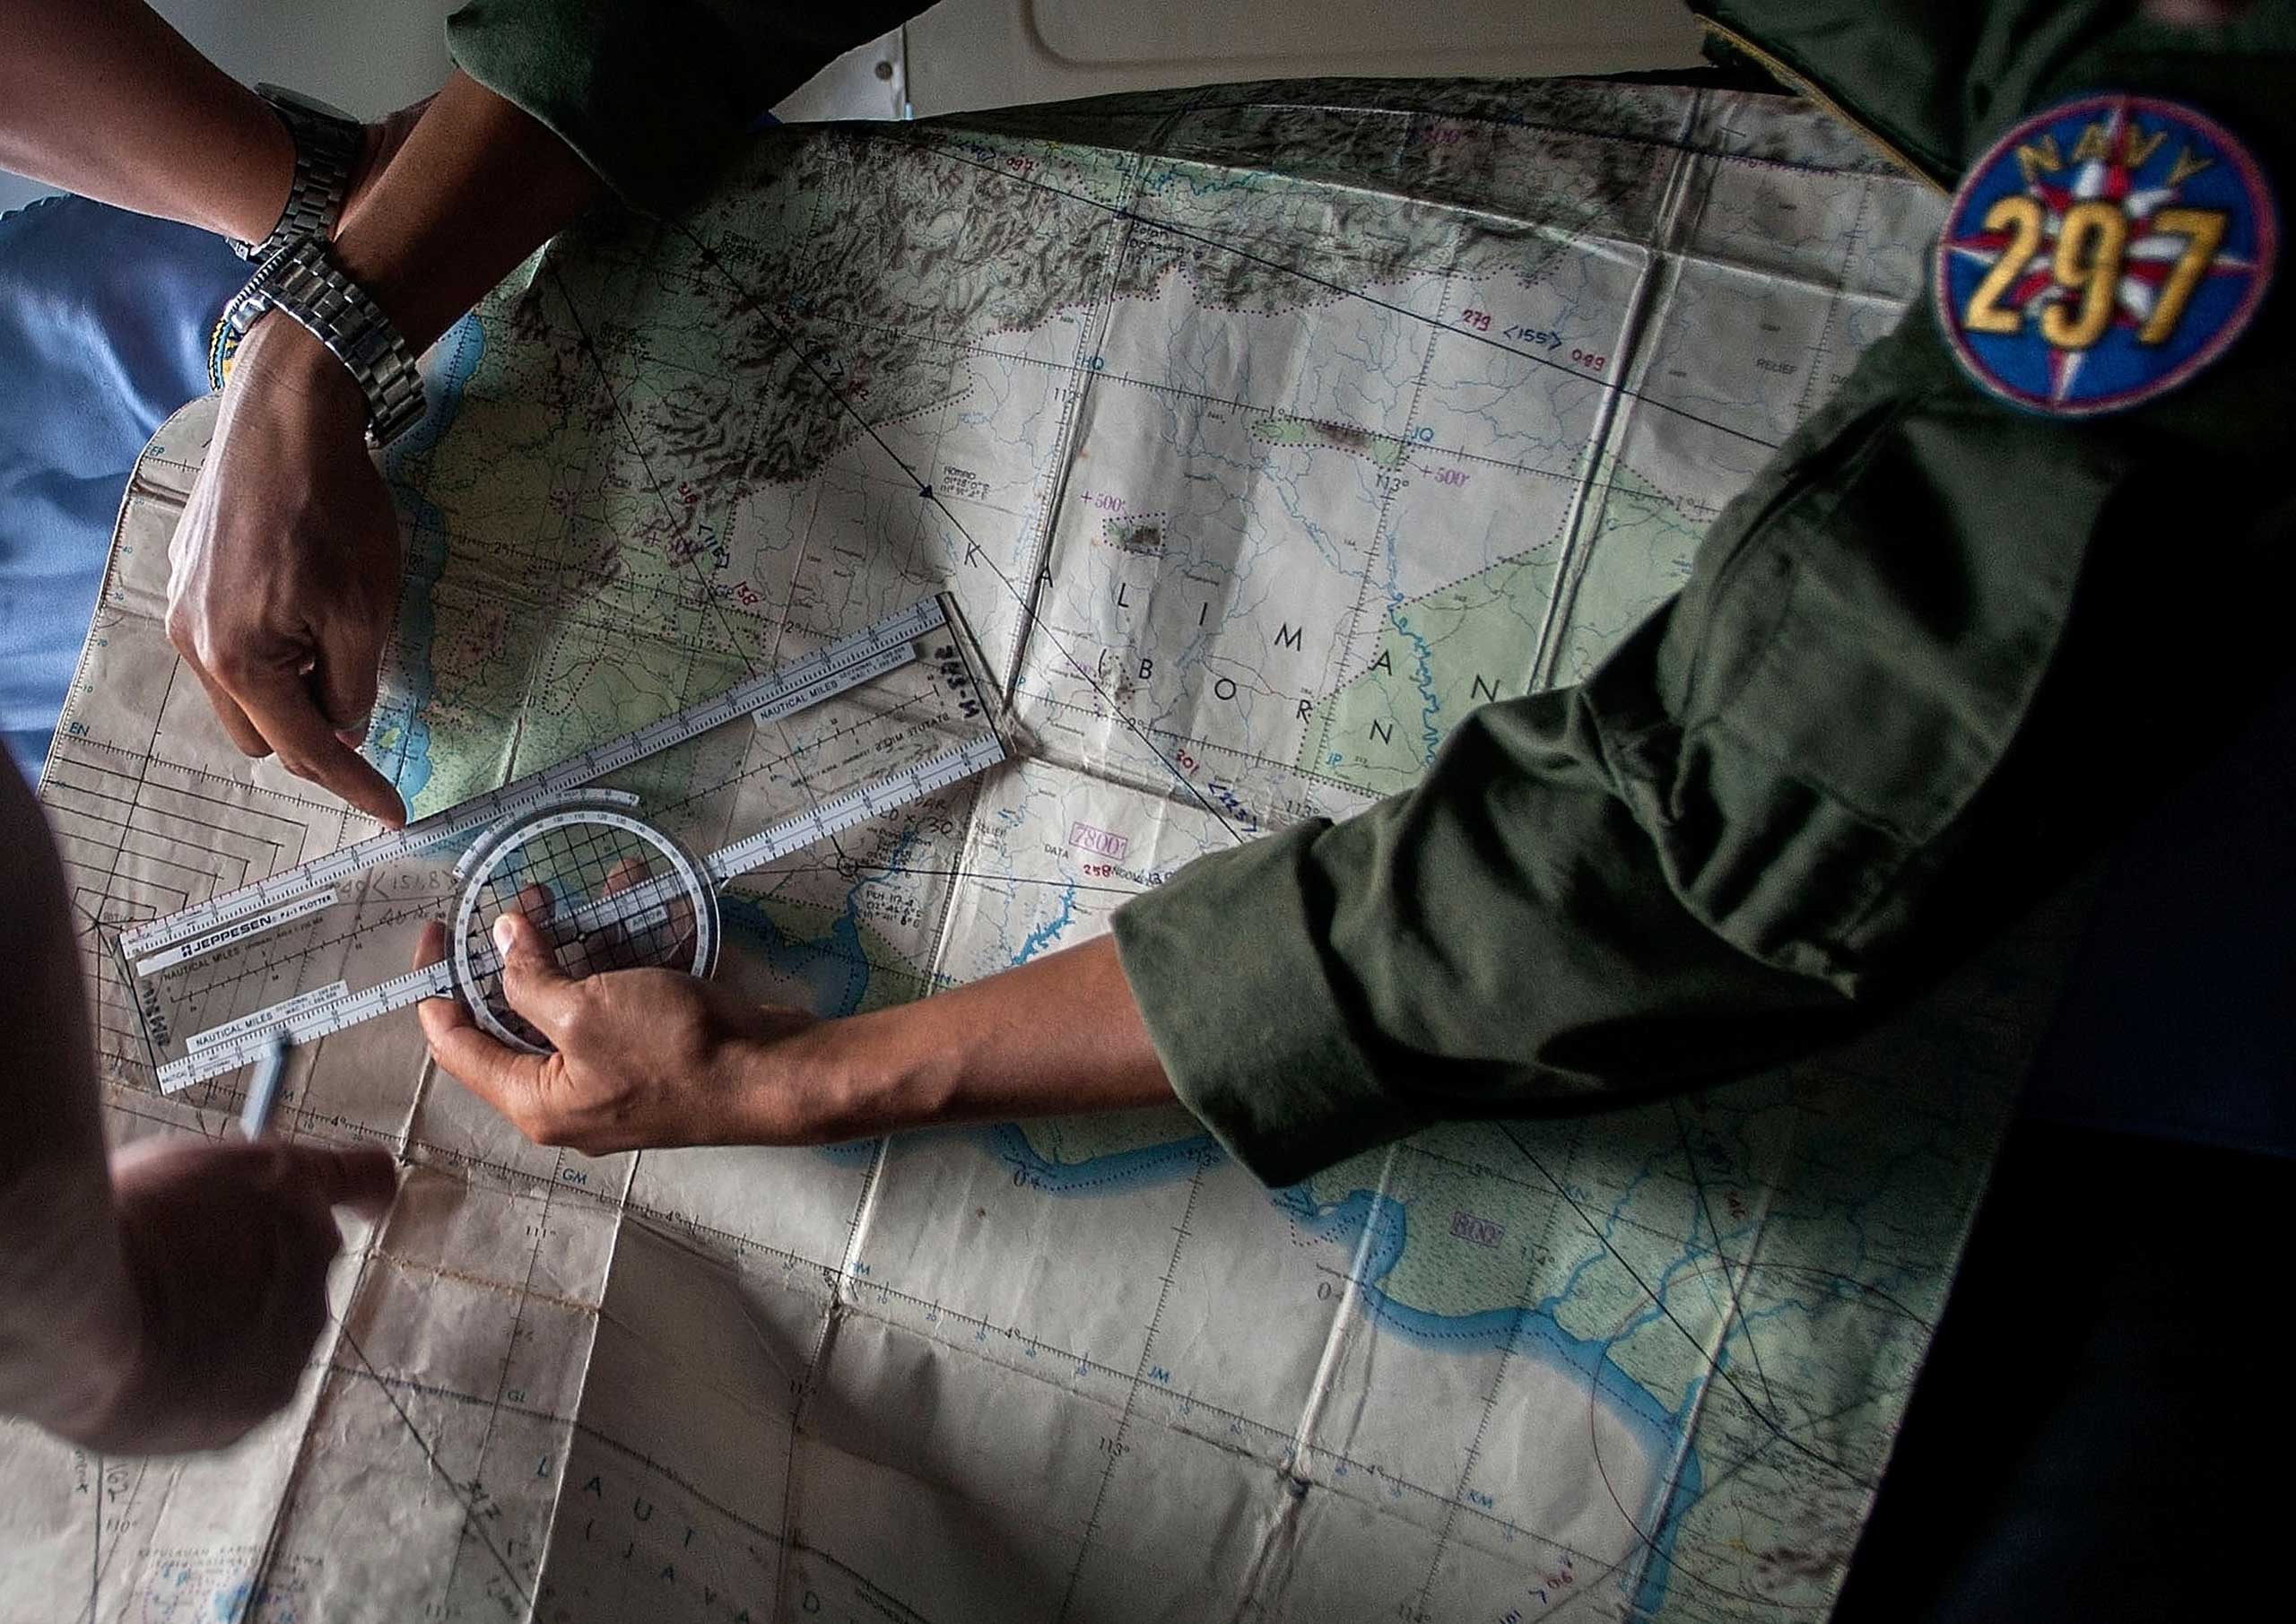 Indonesian Army personnel read a map during a search and rescue operation for missing AirAsia flight QZ8501, over the waters of the Java Sea on Dec. 29, 2014.